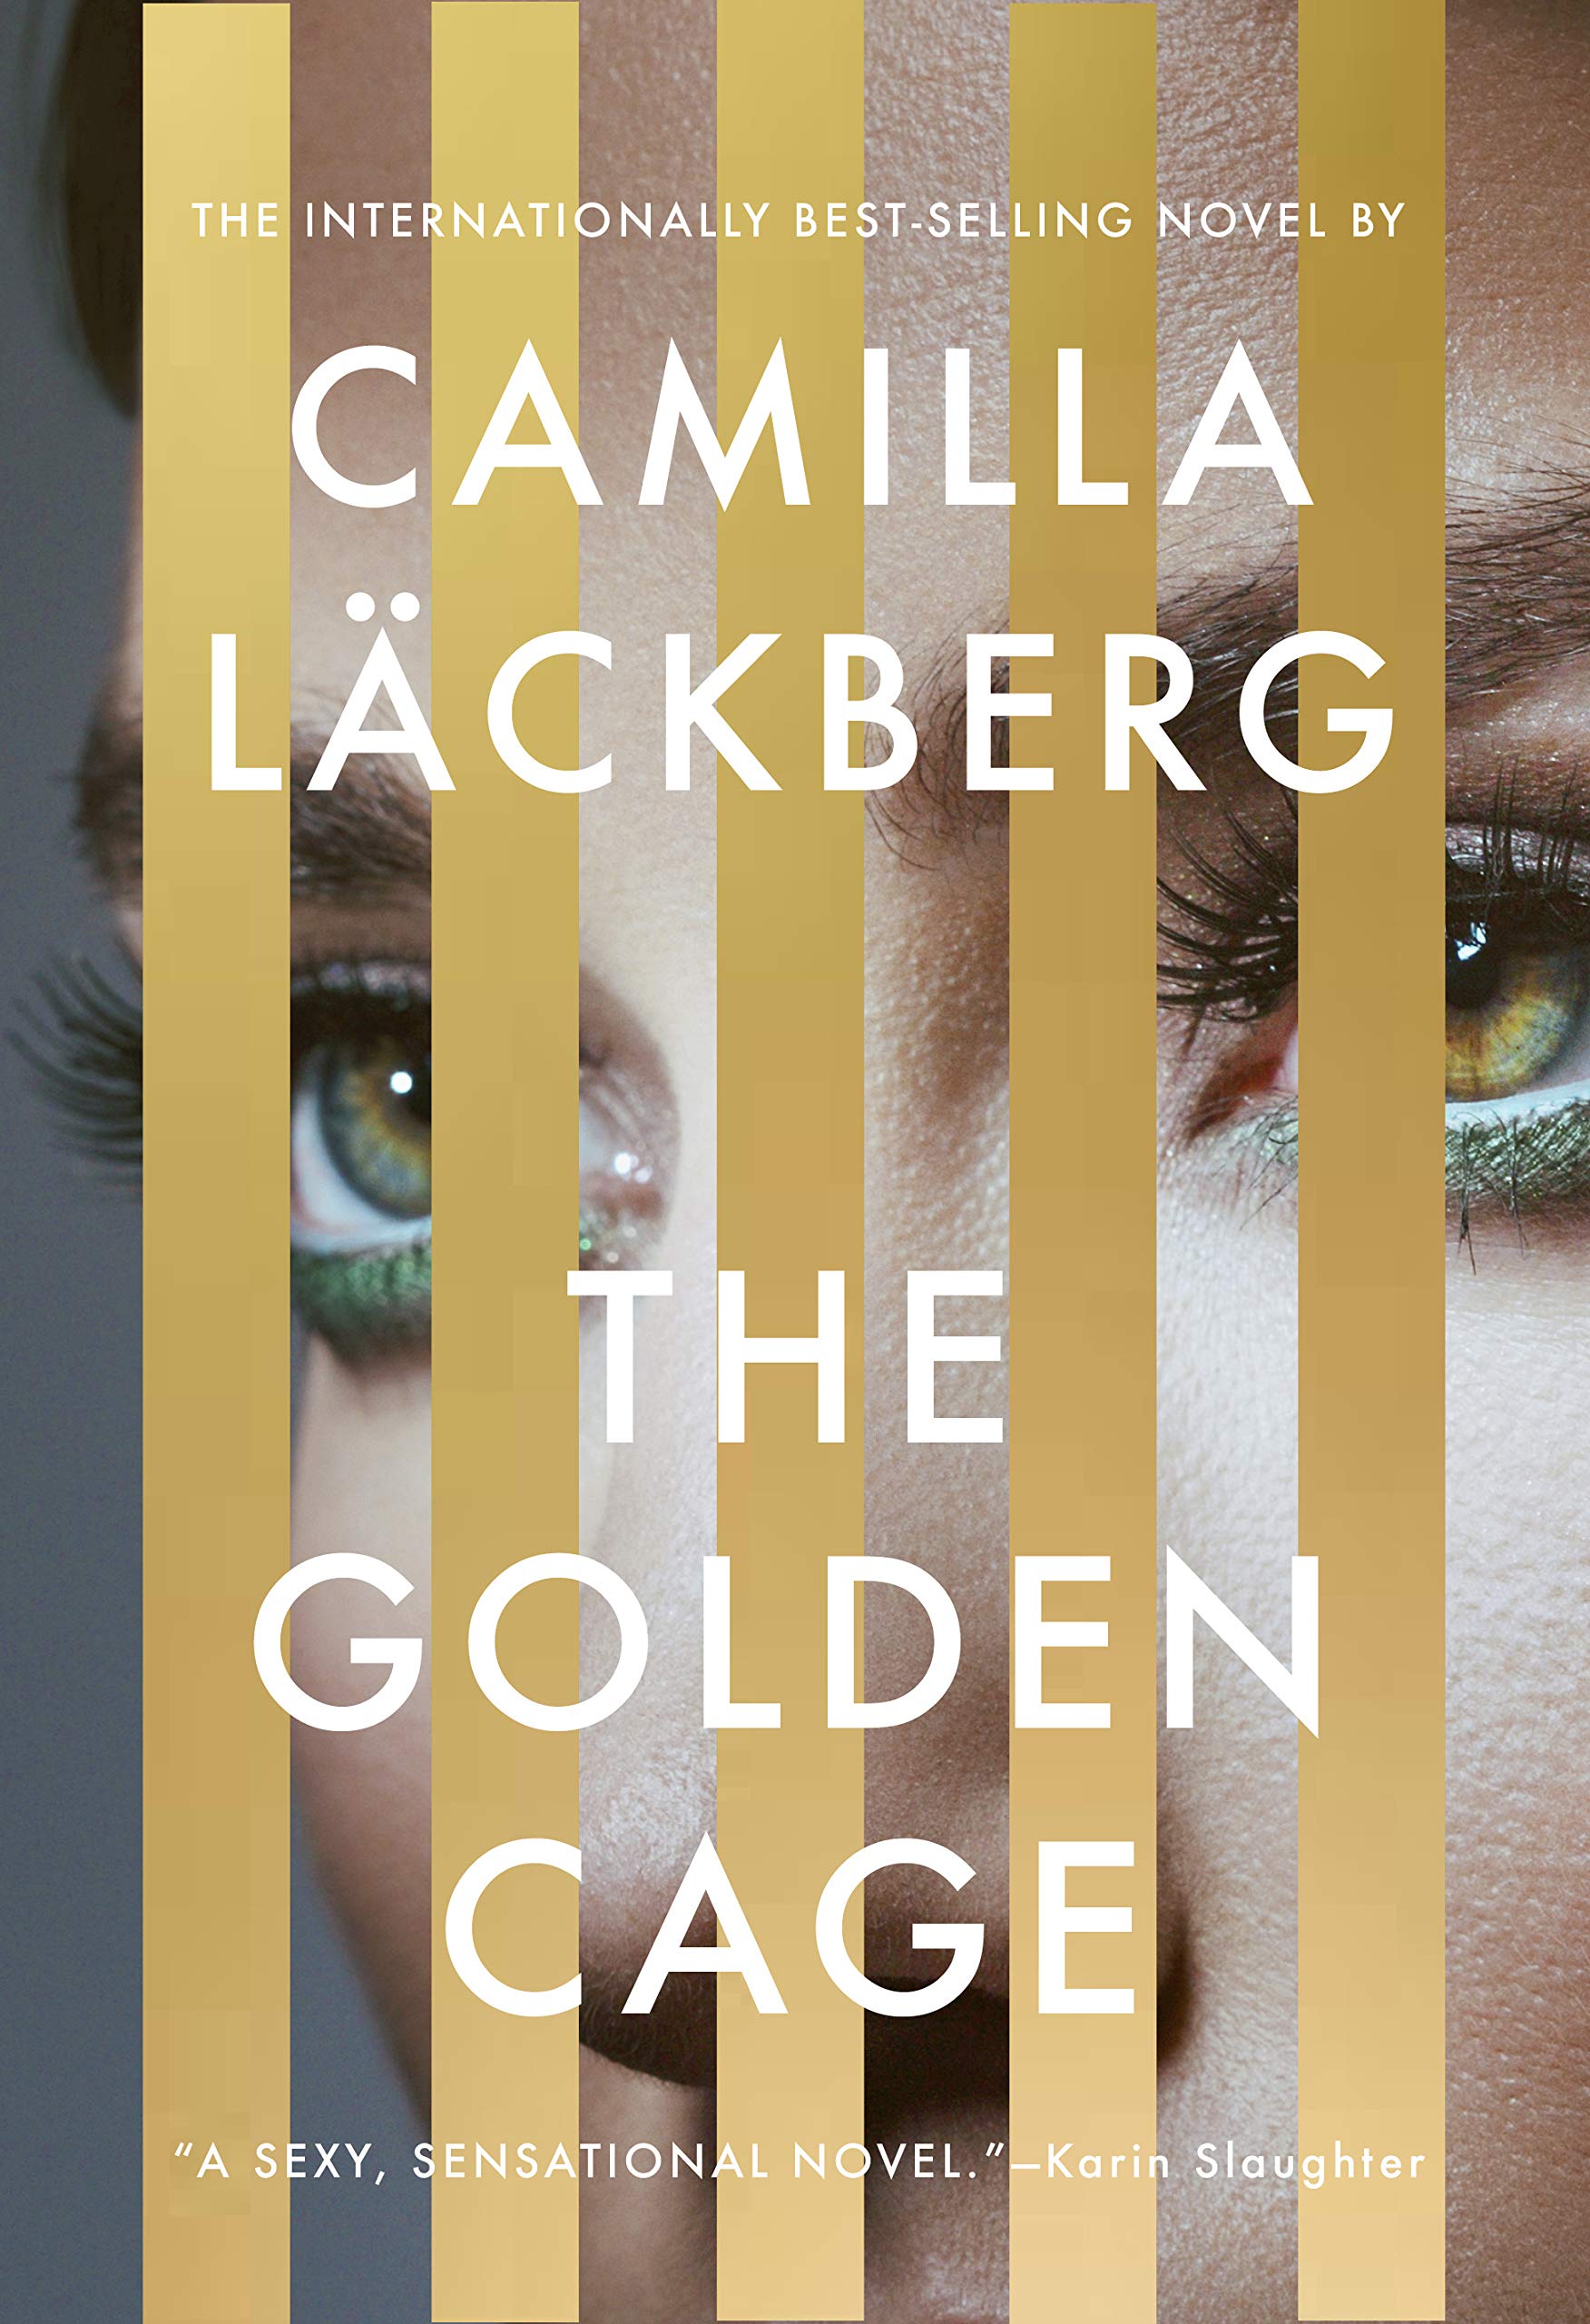 Image for "The Golden Cage"